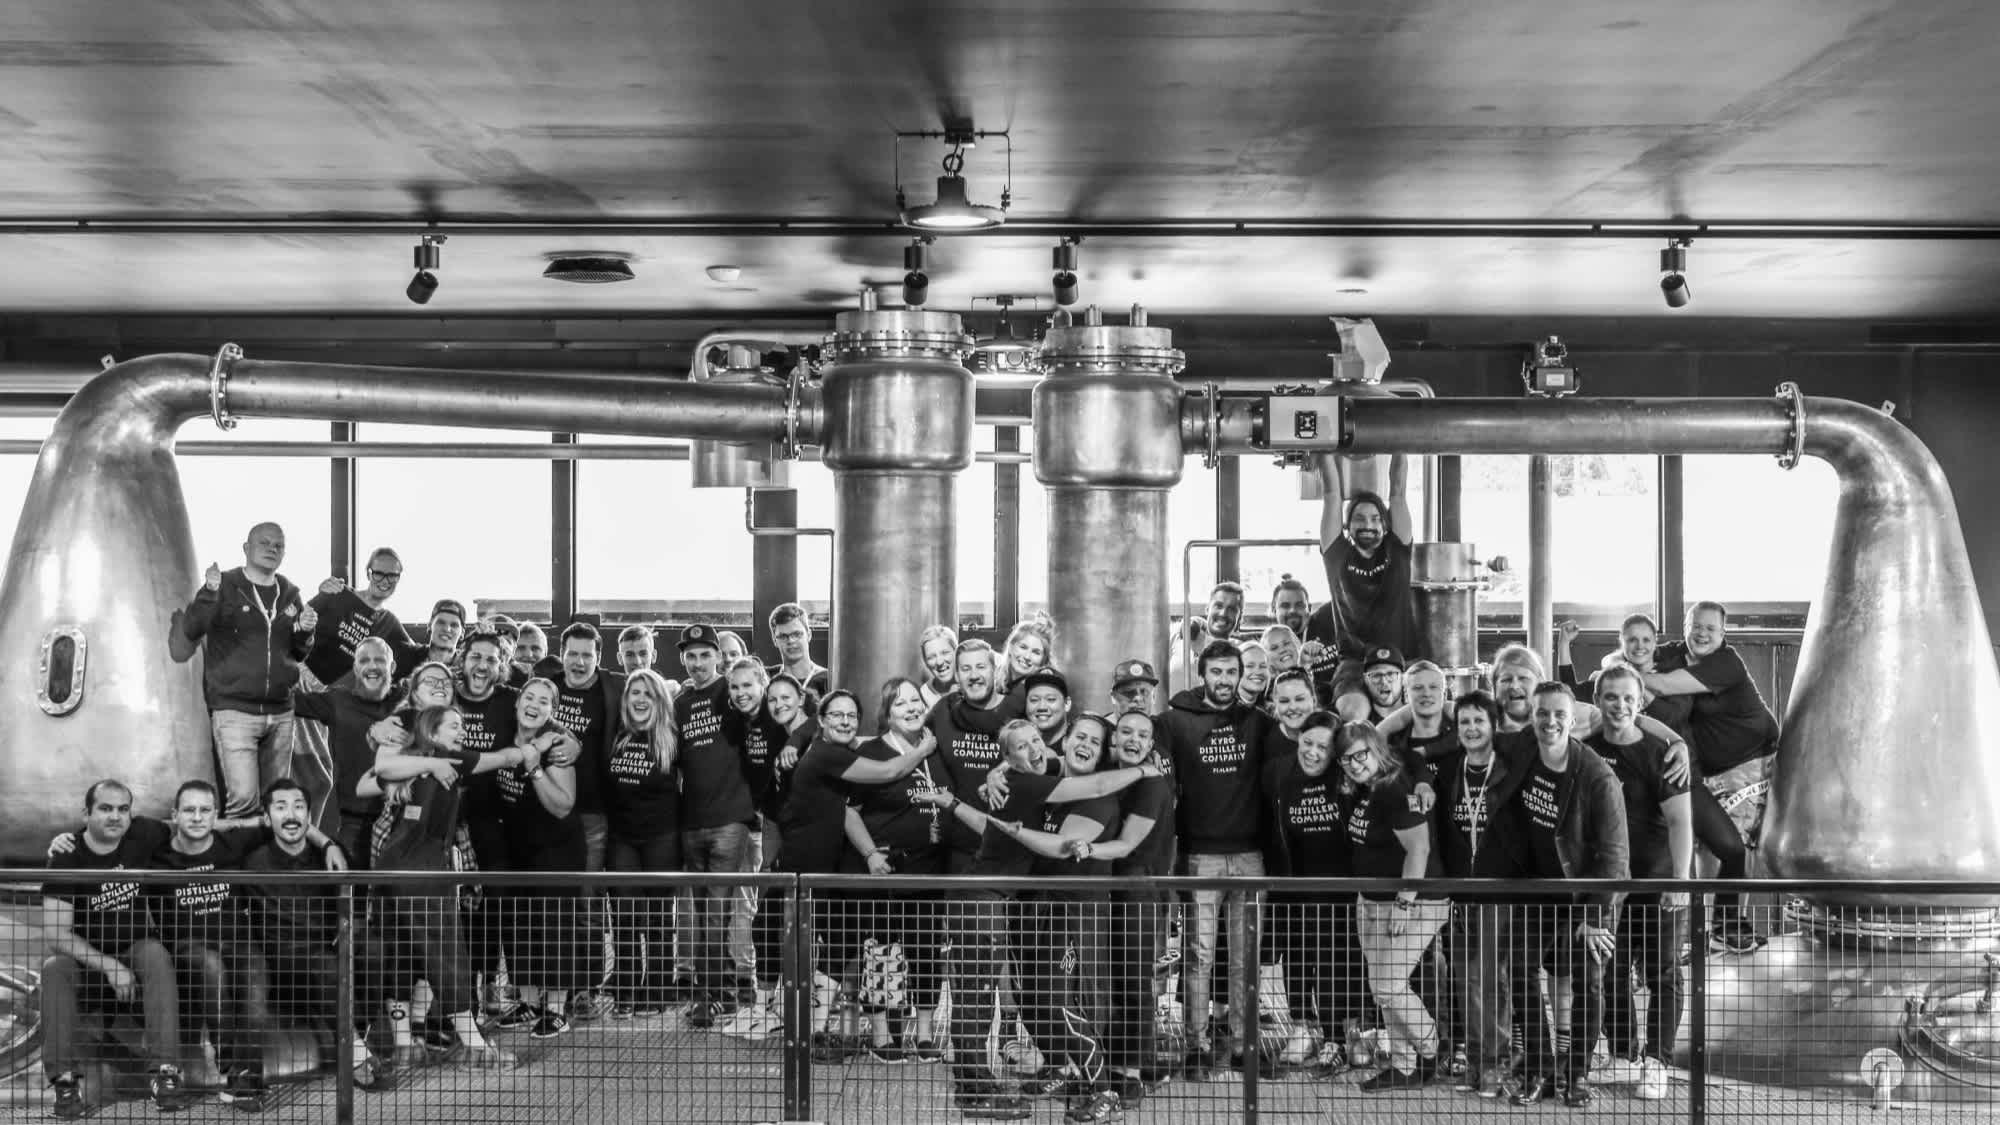 A black and white image of the Kyrö people: most of the Kyrö team pictured in front of the whisky pot distills in Isokyrö, Finland. 